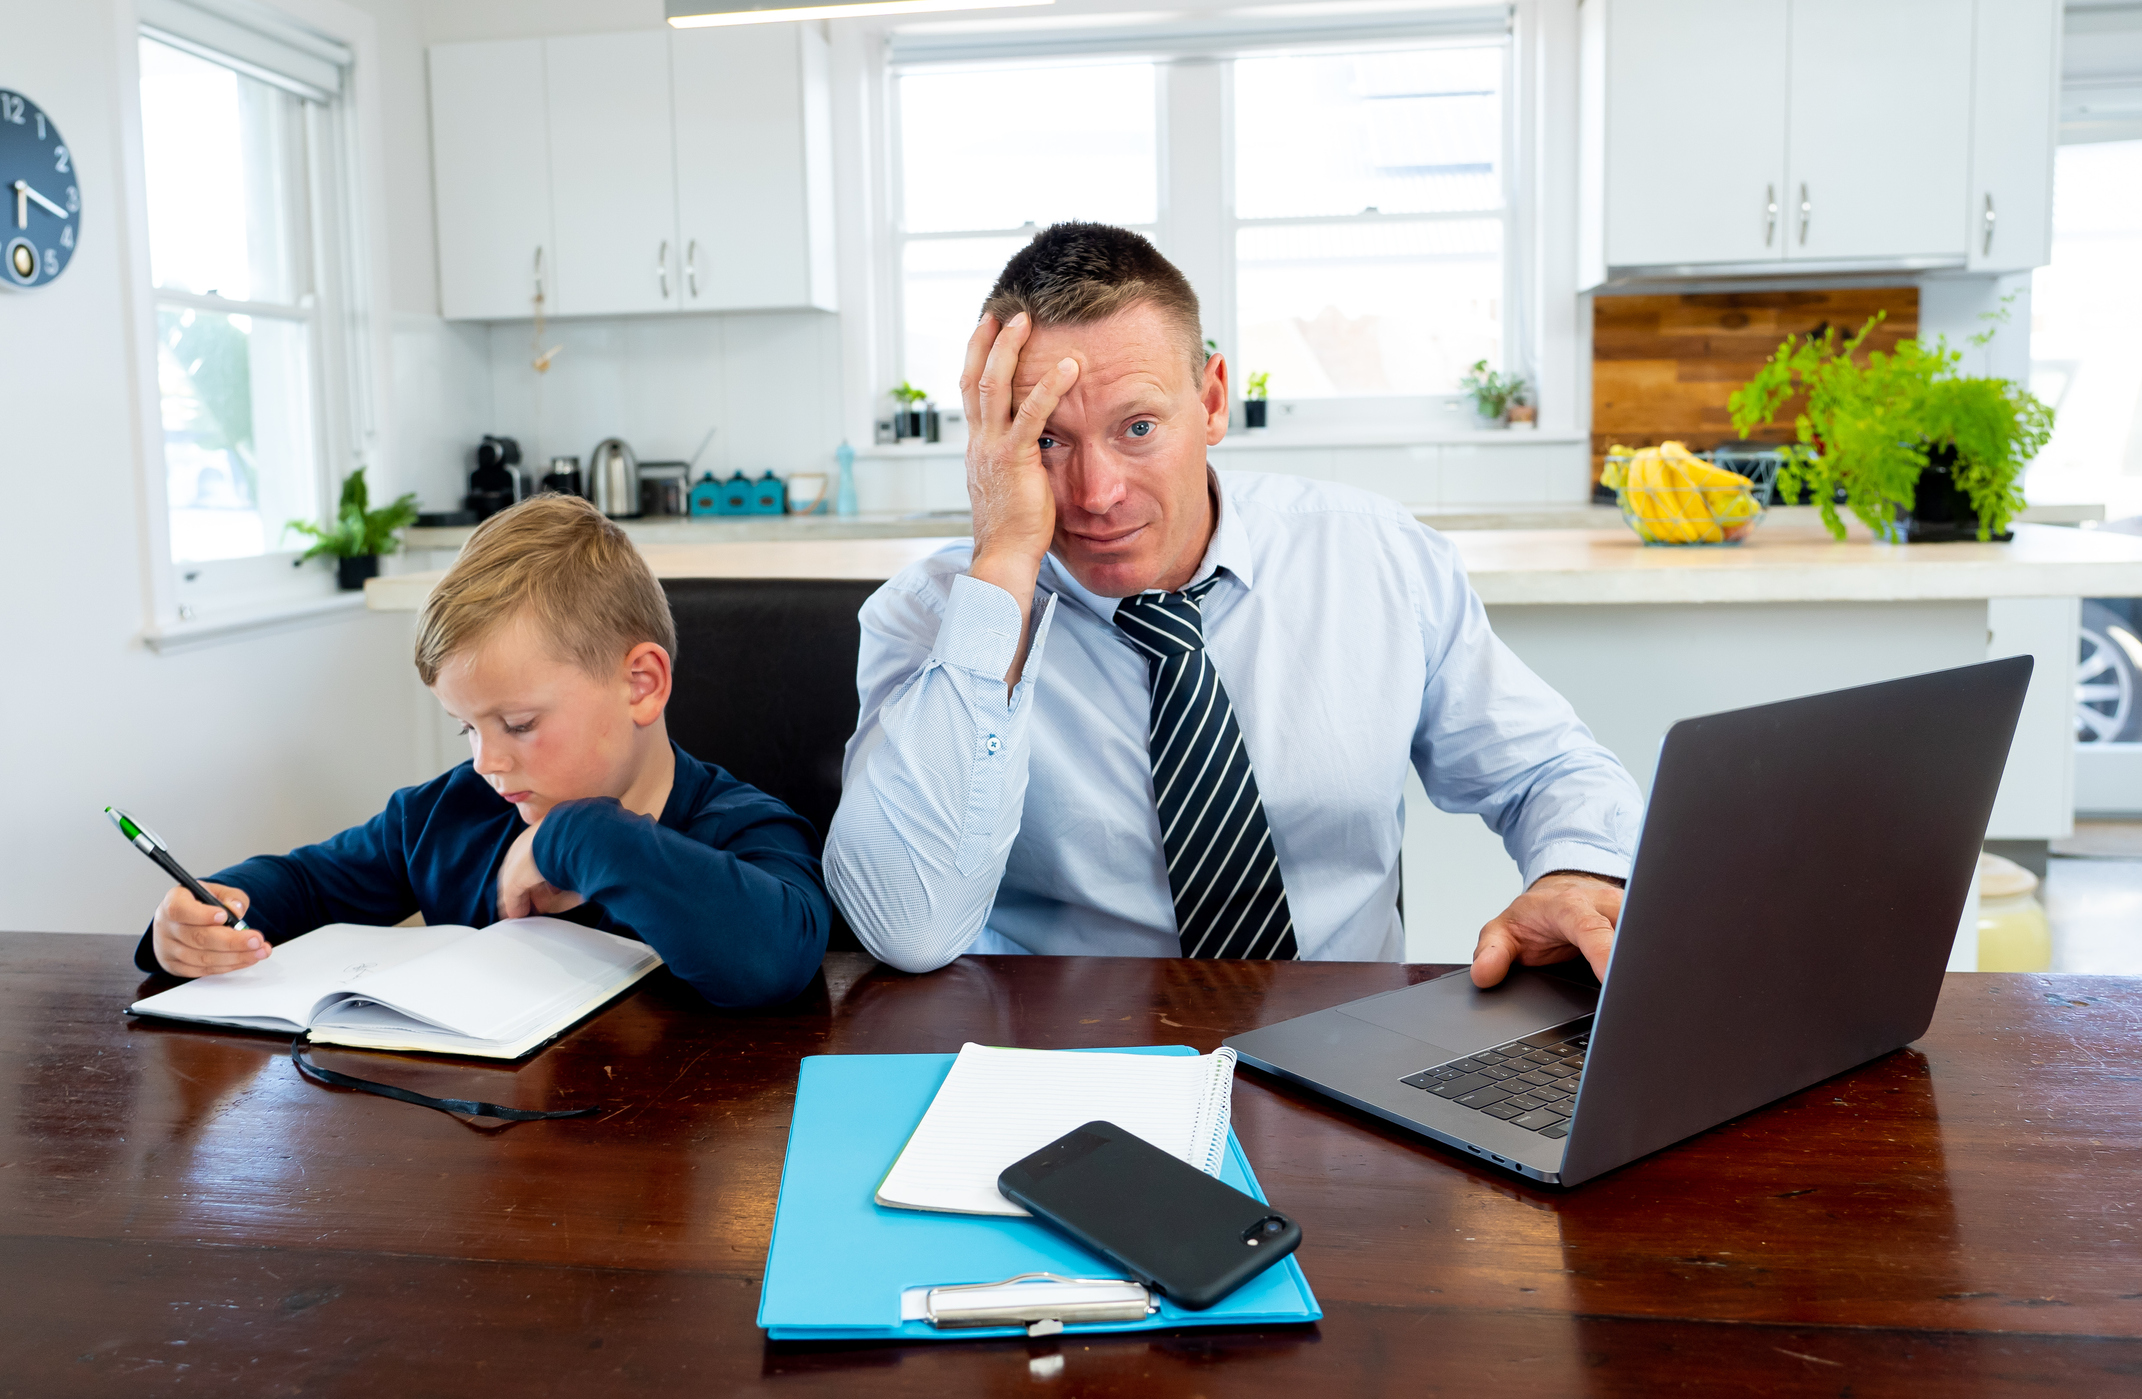 Stressed parent dealing with work from home and home schooling